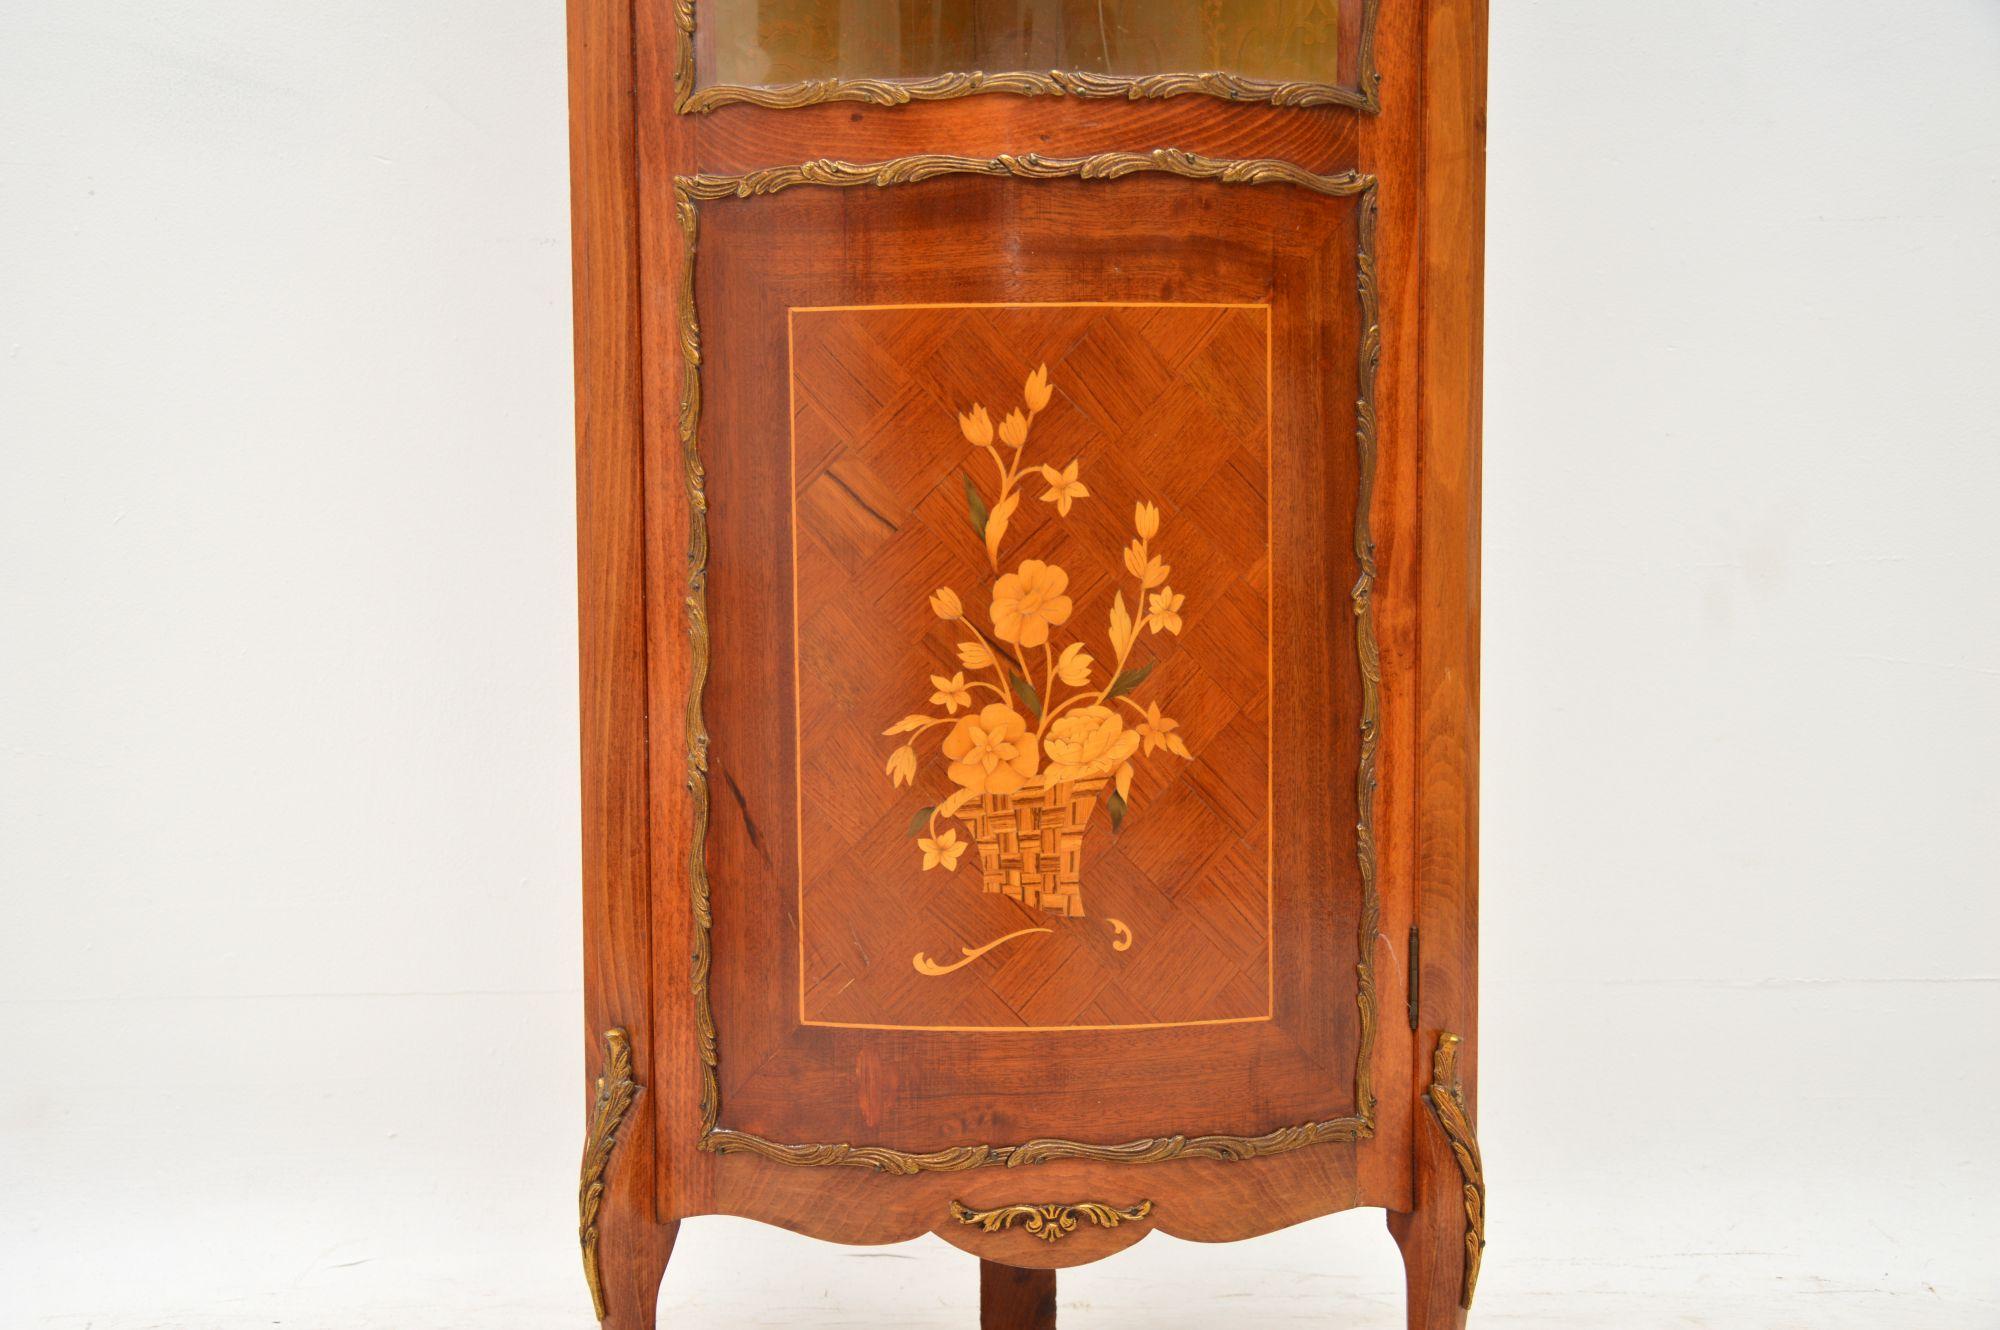 Kingwood Antique French Inlaid Marquetry Corner Cabinet